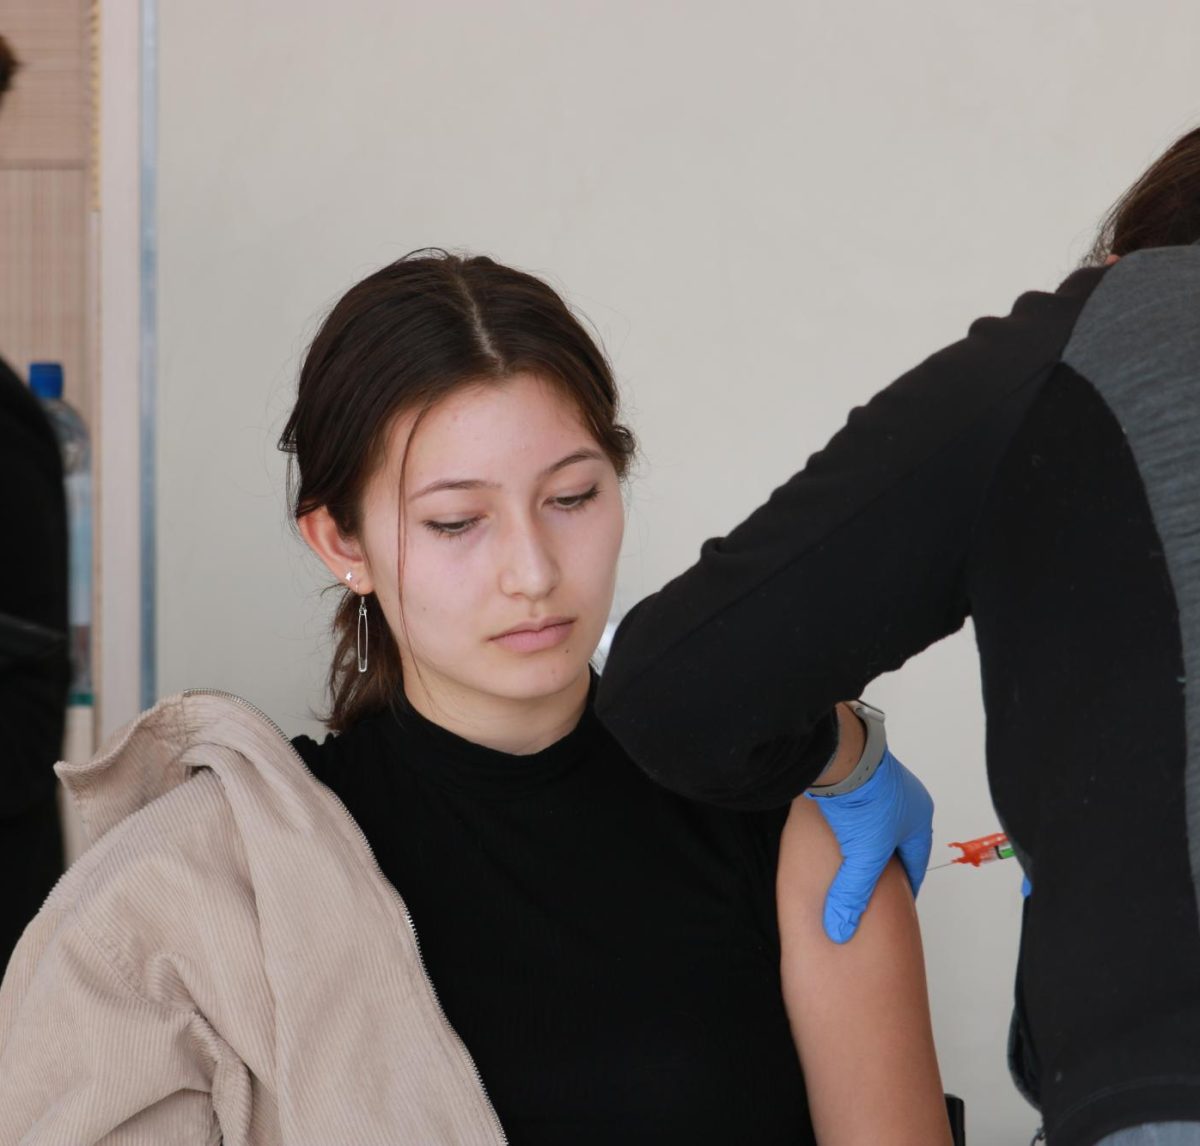 Then-sophomore Sienna Swanson gets a COVID-19 vaccine during Menlos vaccine clinic in the Spieker Center on Nov. 11, 2022.